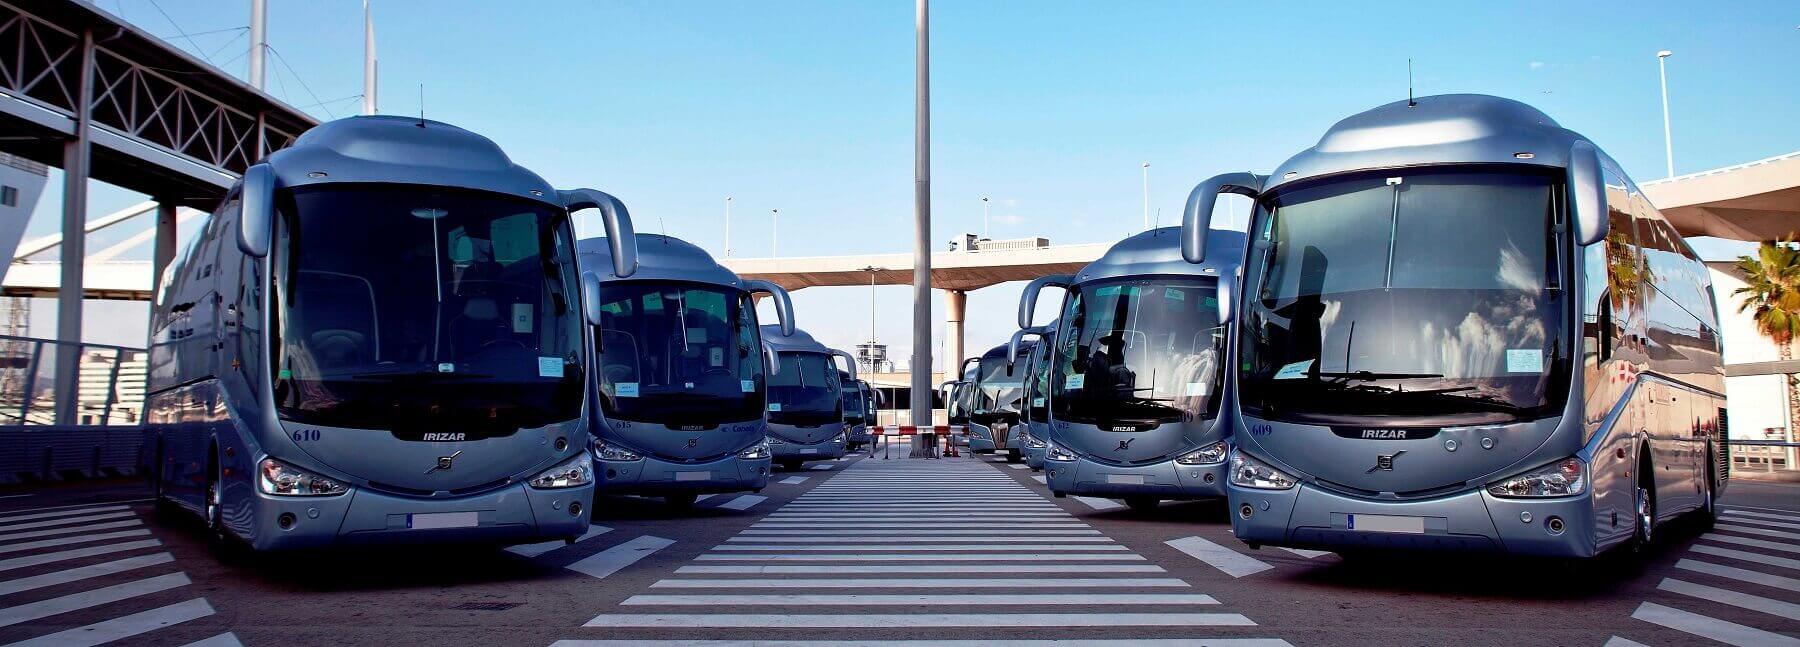 Hire of coaches and minibuses in Barcelona